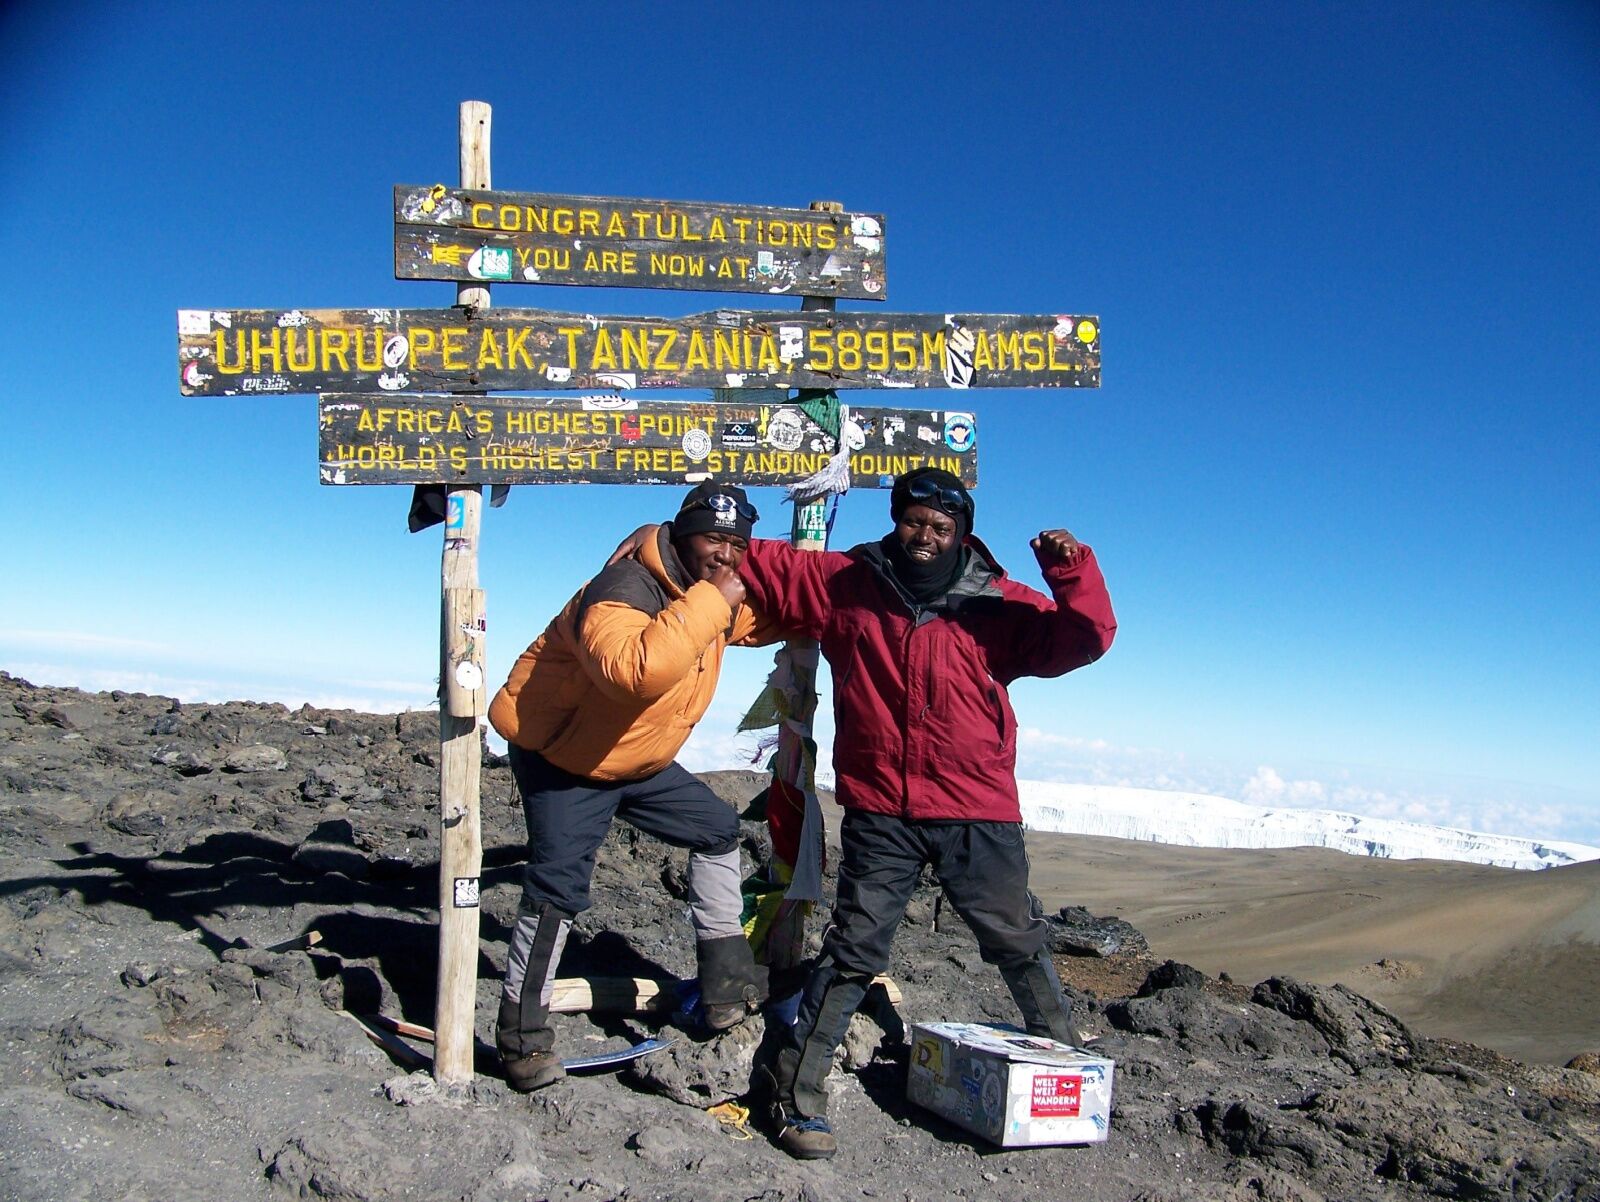 how cold is it at the top of Mount Kilimanjaro - hikers at top